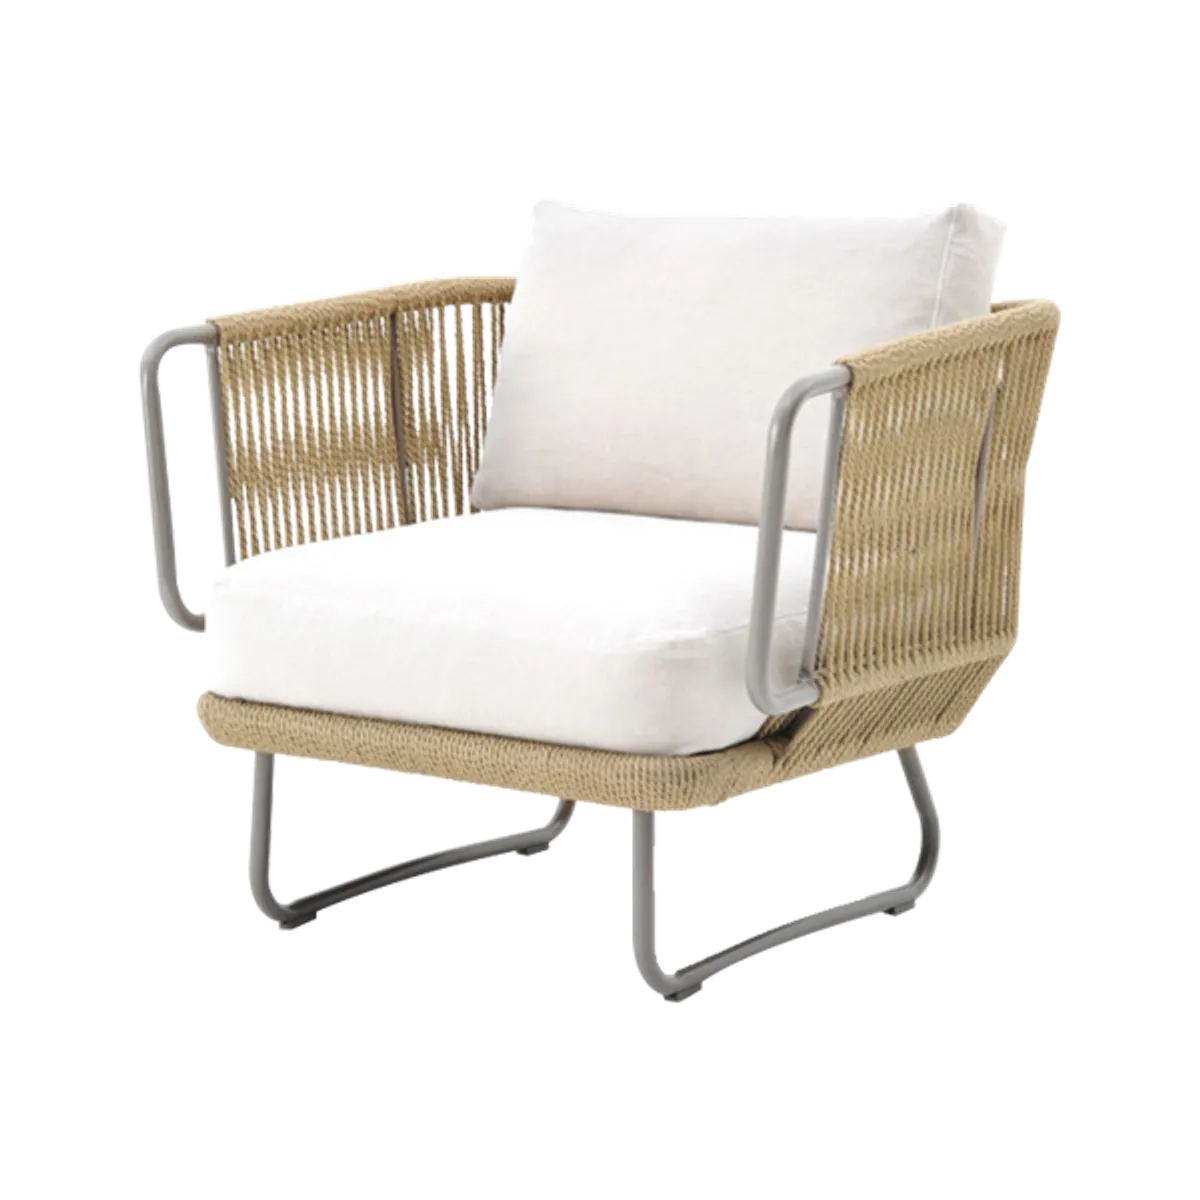 Web Babylon Lounge Chair Outdoor Lounge Furniture For Poolside Cafes And Hotel Terraaces Detail Insideoutcontracts 031